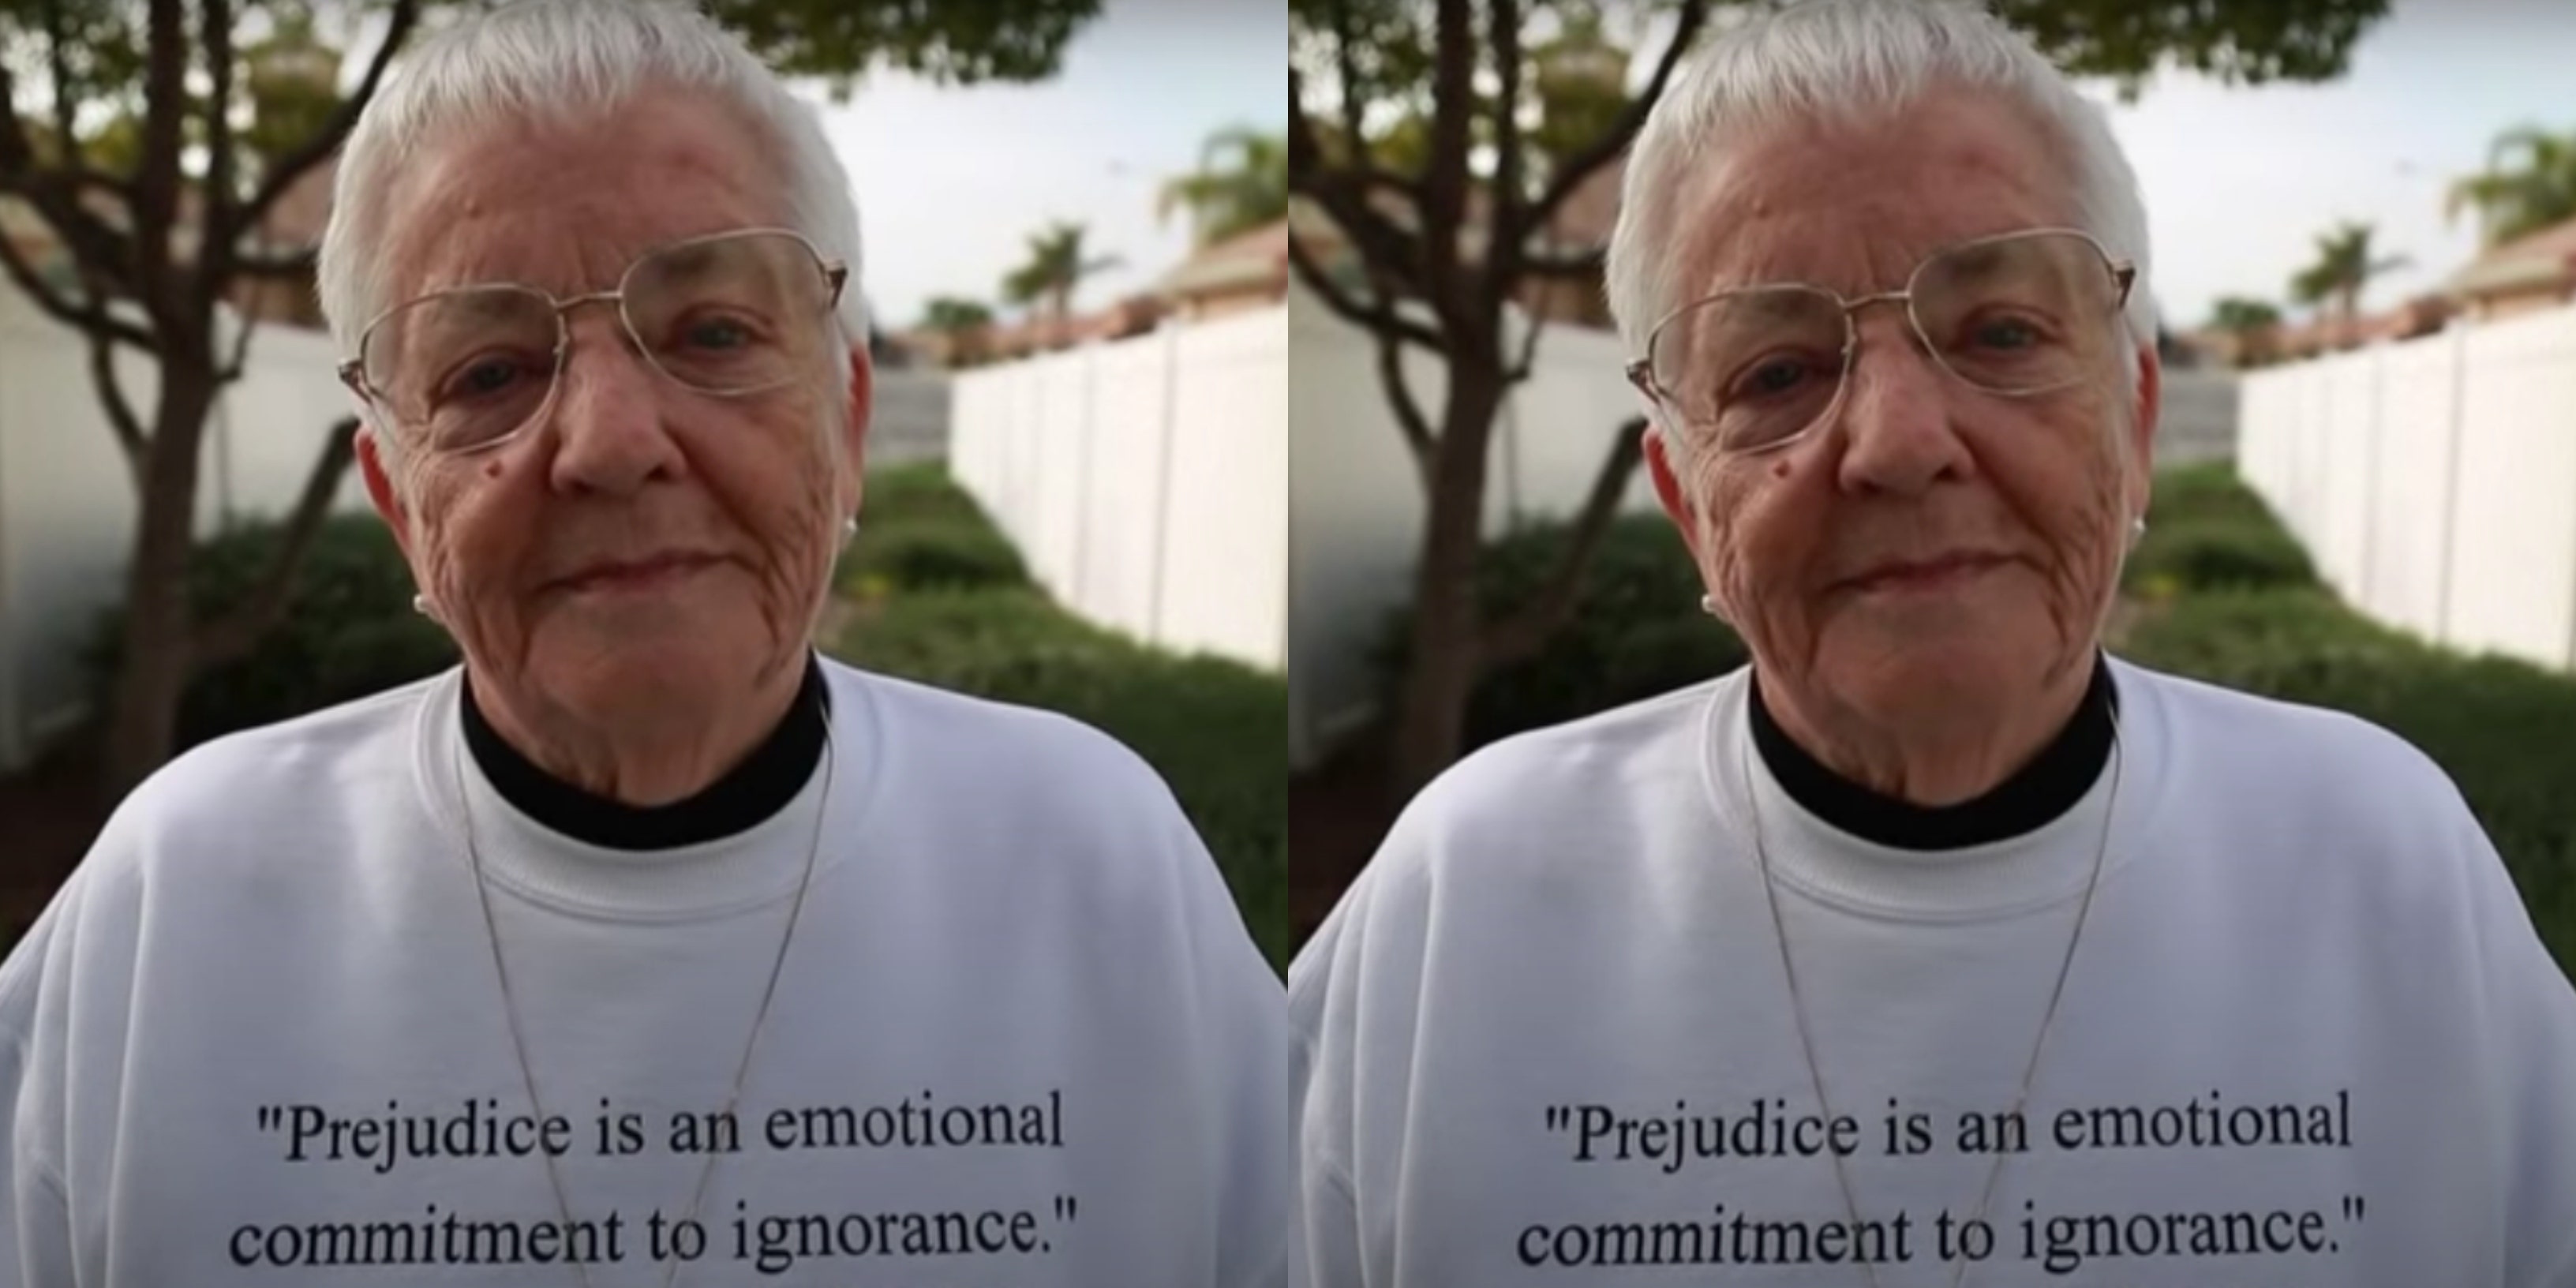 15 Antiracism Lessons From The 50-Year-Old Jane Elliott Experiment That Are Unfortunately Still Relevant Today